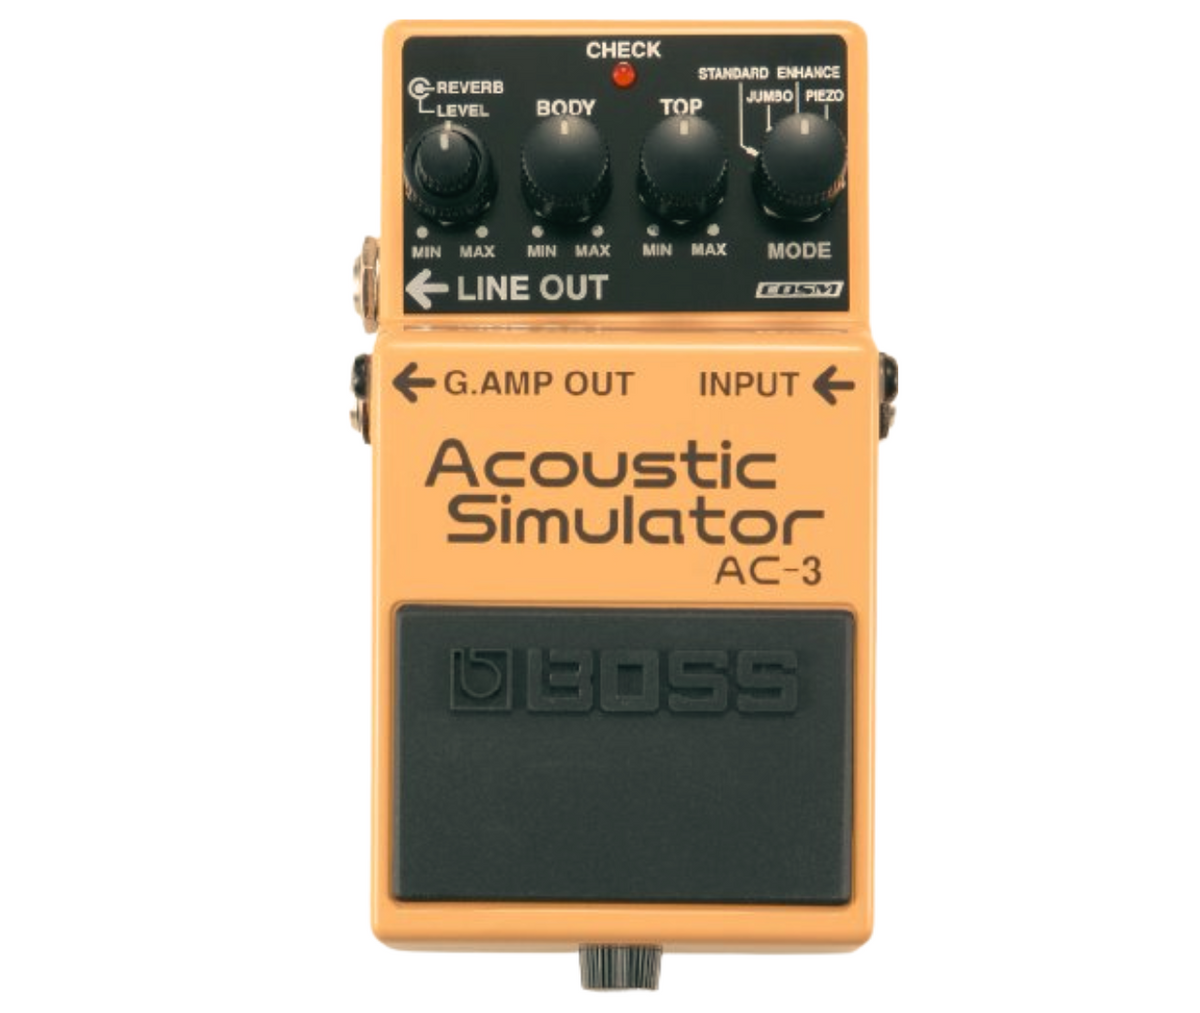 BOSS AC-3 Acoustic Simulator Best Guitar Effects Pedal Electric to Acoustic Guitar Simulation